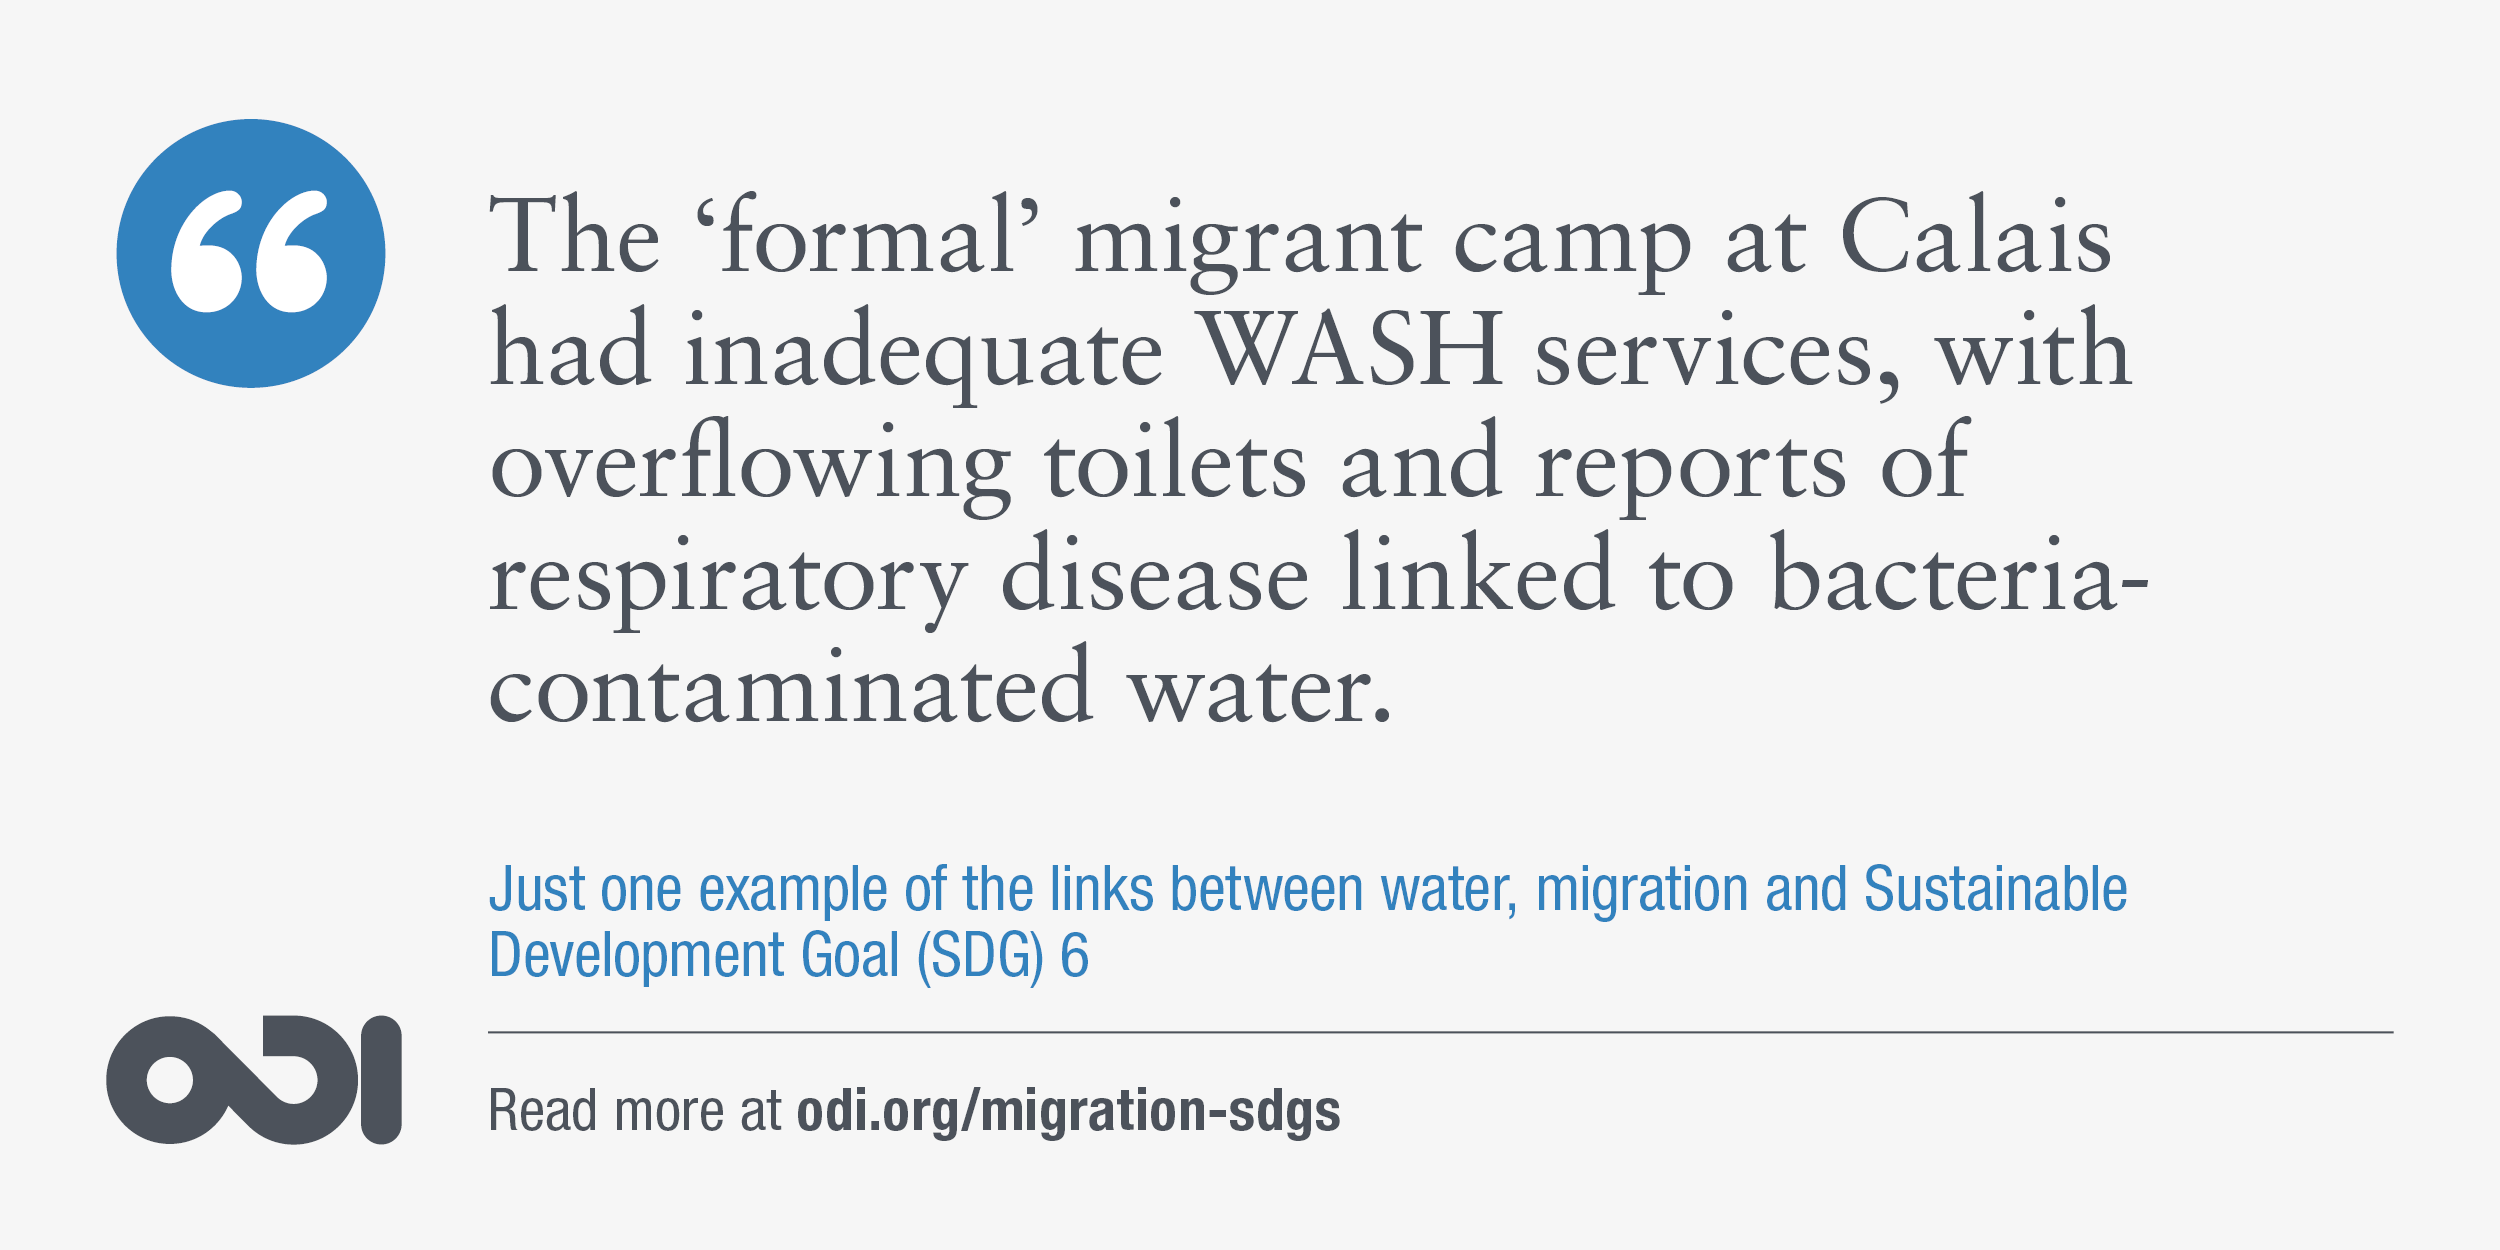 The links between water, migration and SDG 6.